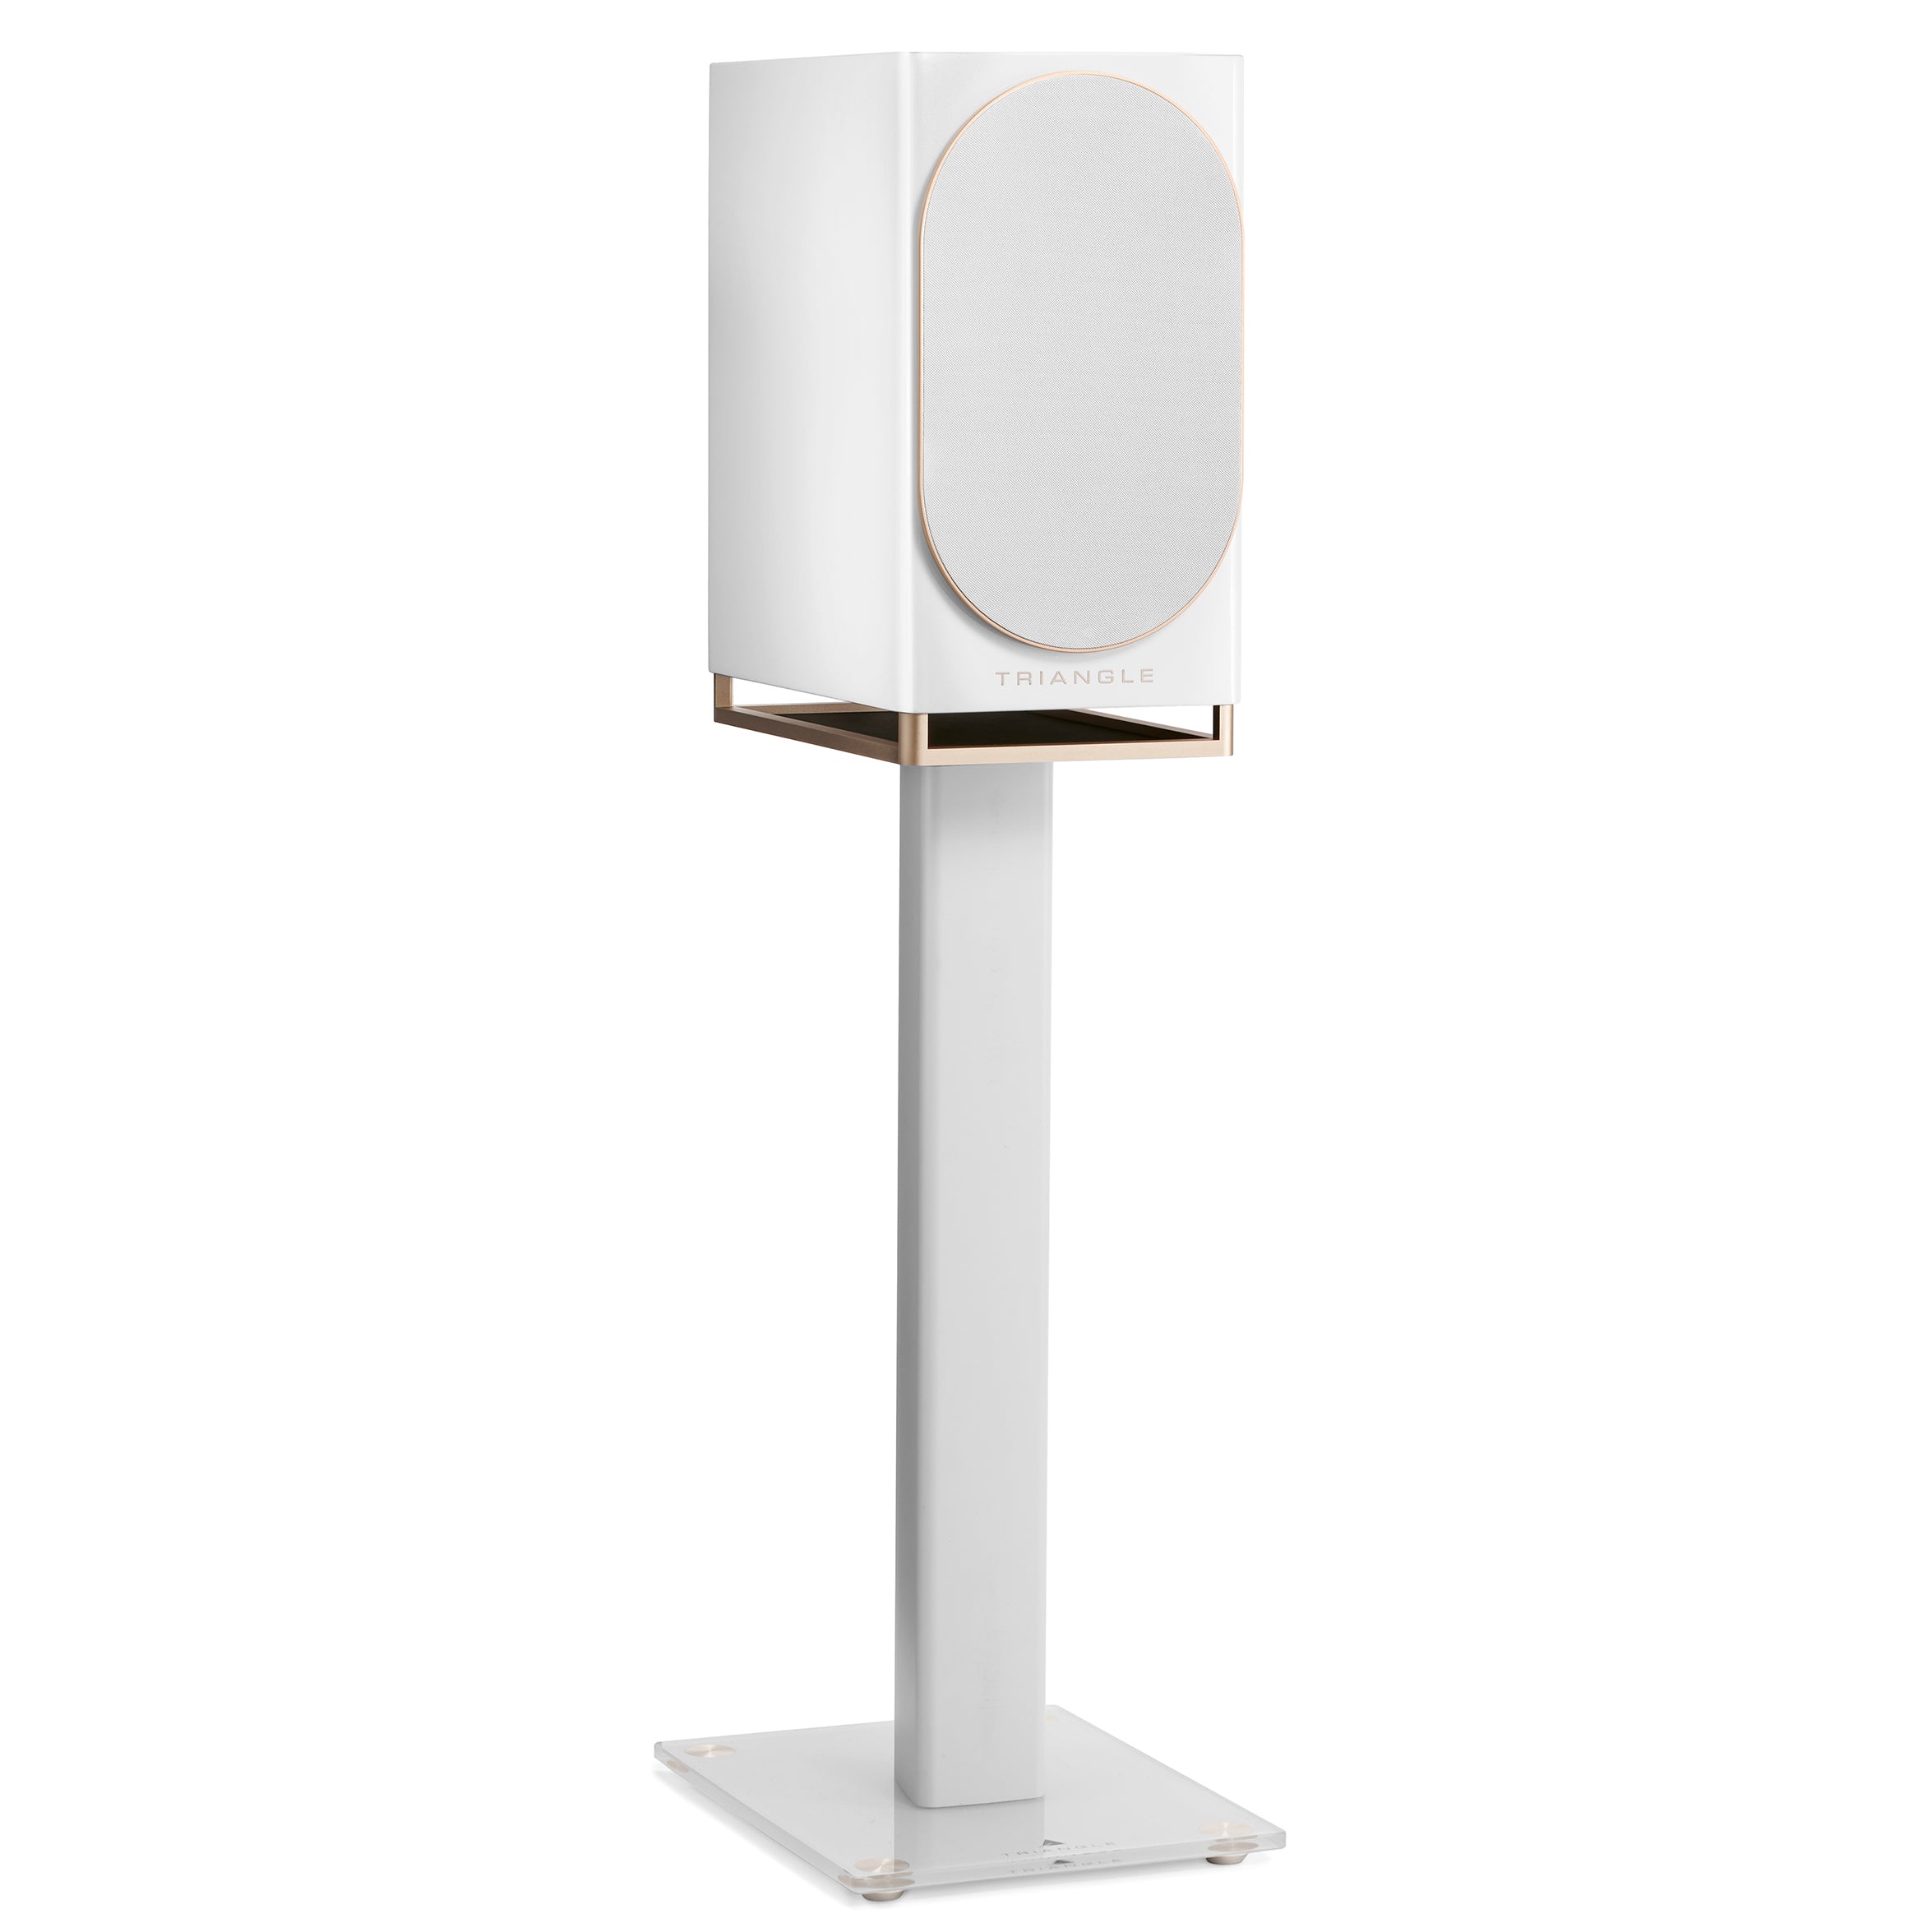 triangle-capella-enceinte-active-wifi-bluetooth-haut-de-gamme-stereo-hub-wisa-streaming-musique-pictures-packshot-blanc-sideral-space-white-supports-s05-2